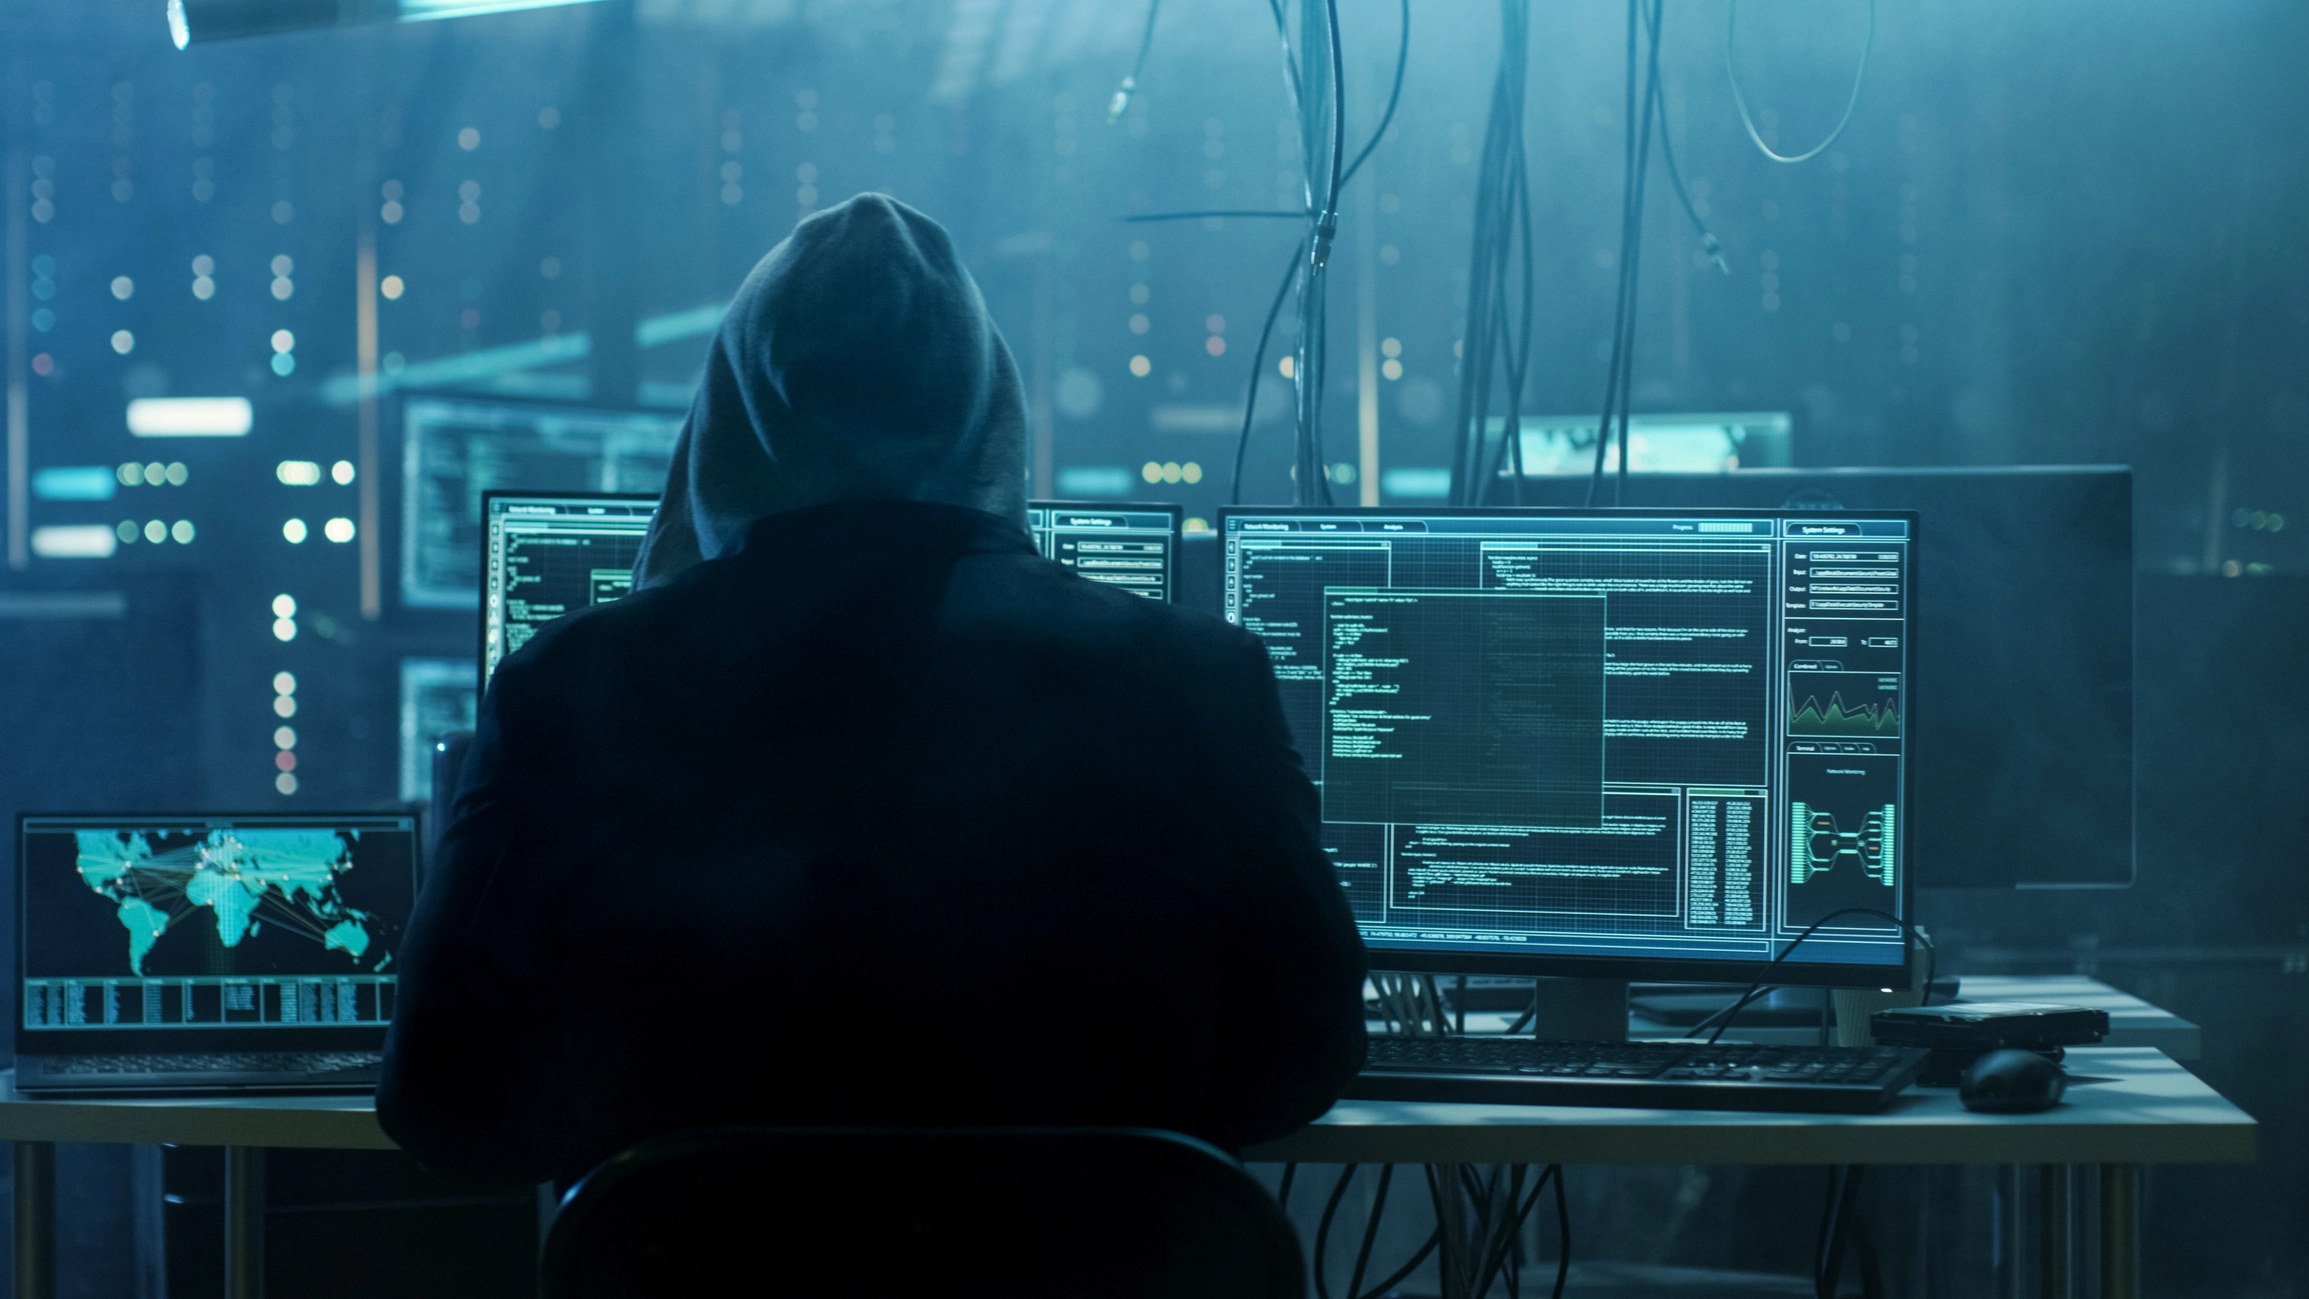 A hooded hacker sits in front of several computer monitors at a workstation inside a dark room full of data servers and cables.